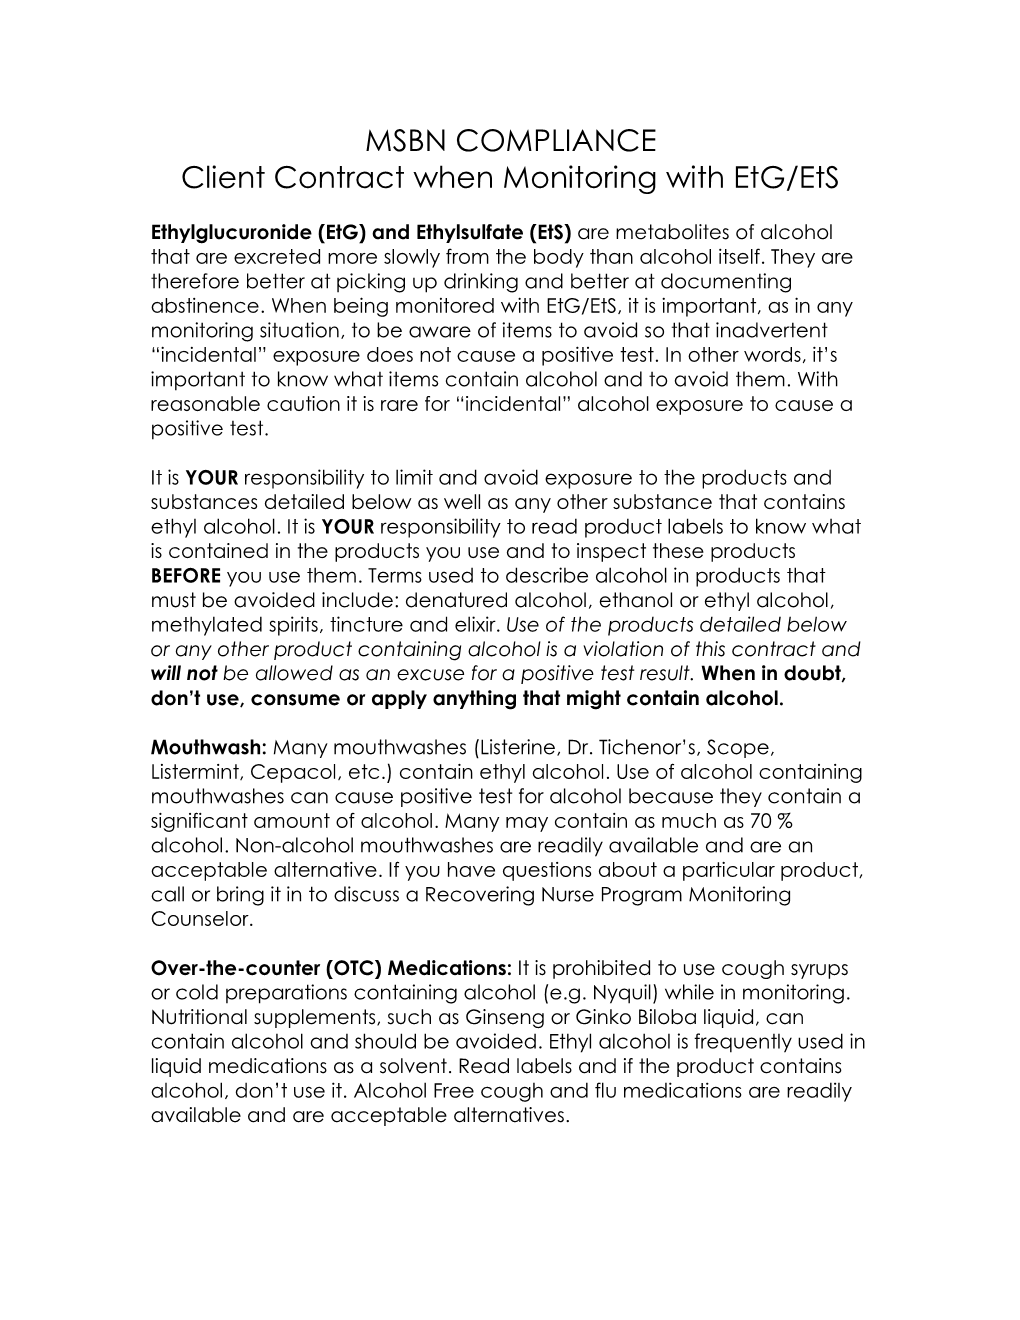 MSBN COMPLIANCE Client Contract When Monitoring with Etg/Ets